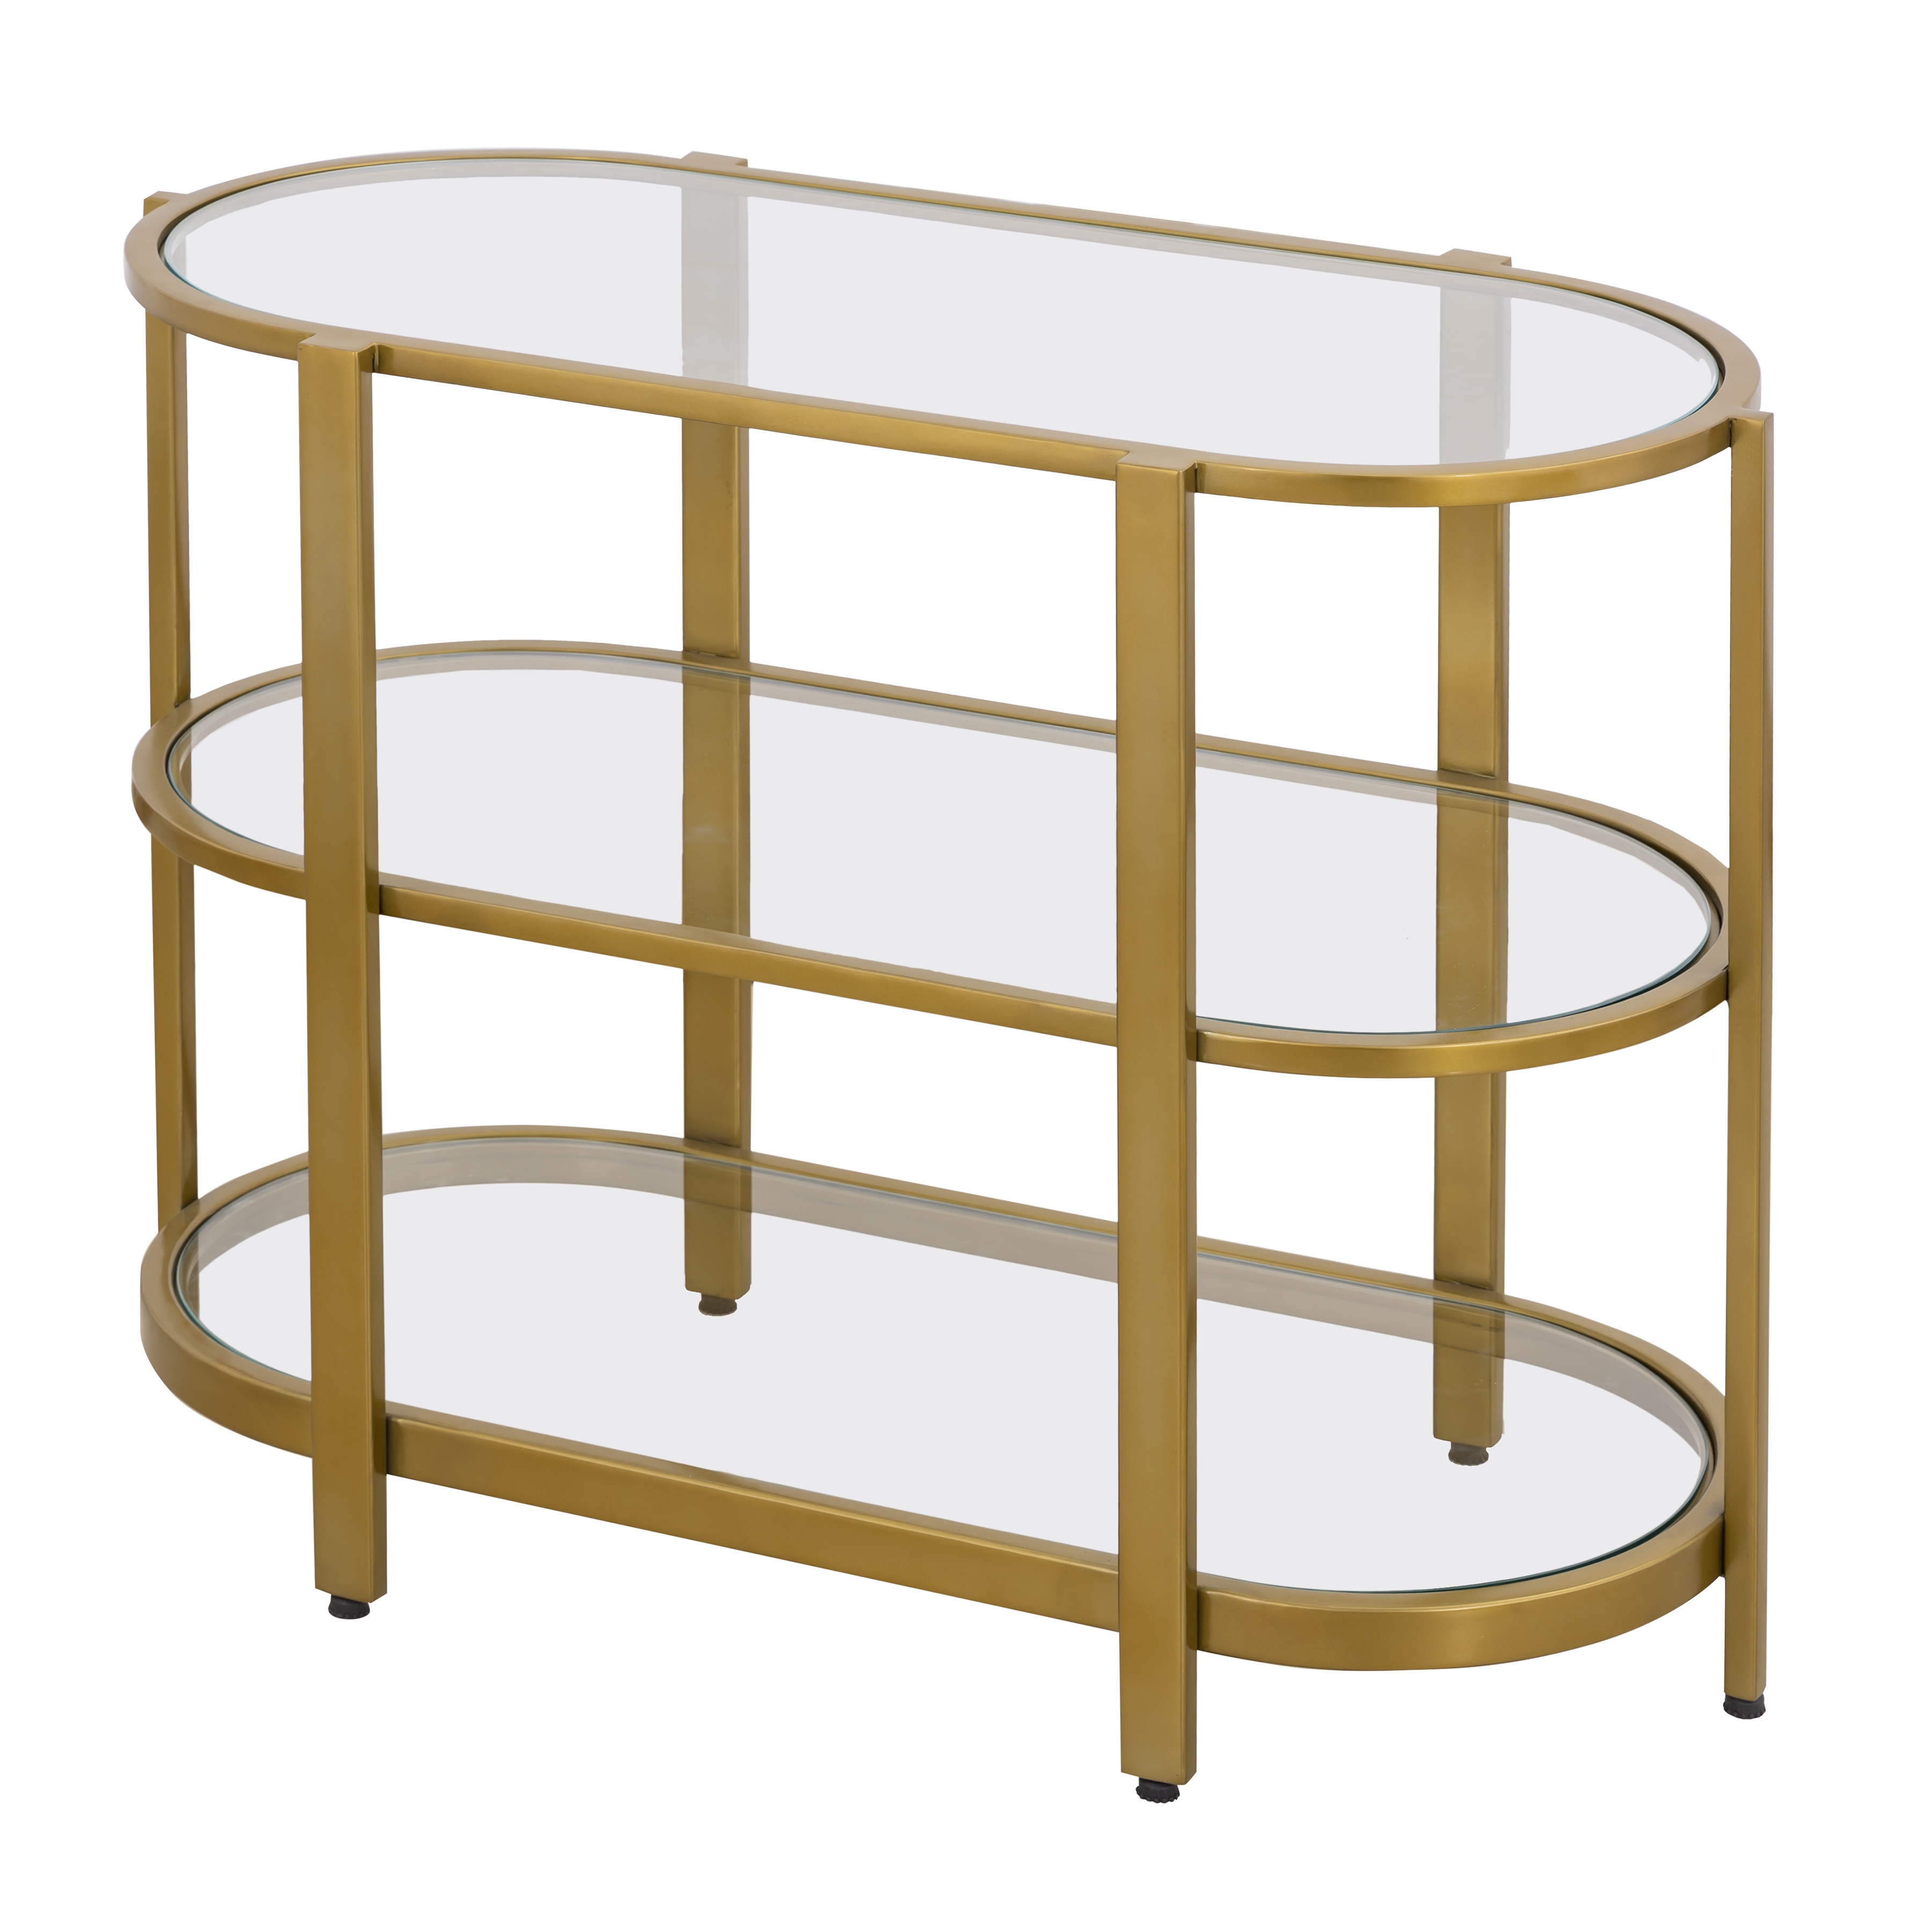 Blain Console Table - Brass - Image 3